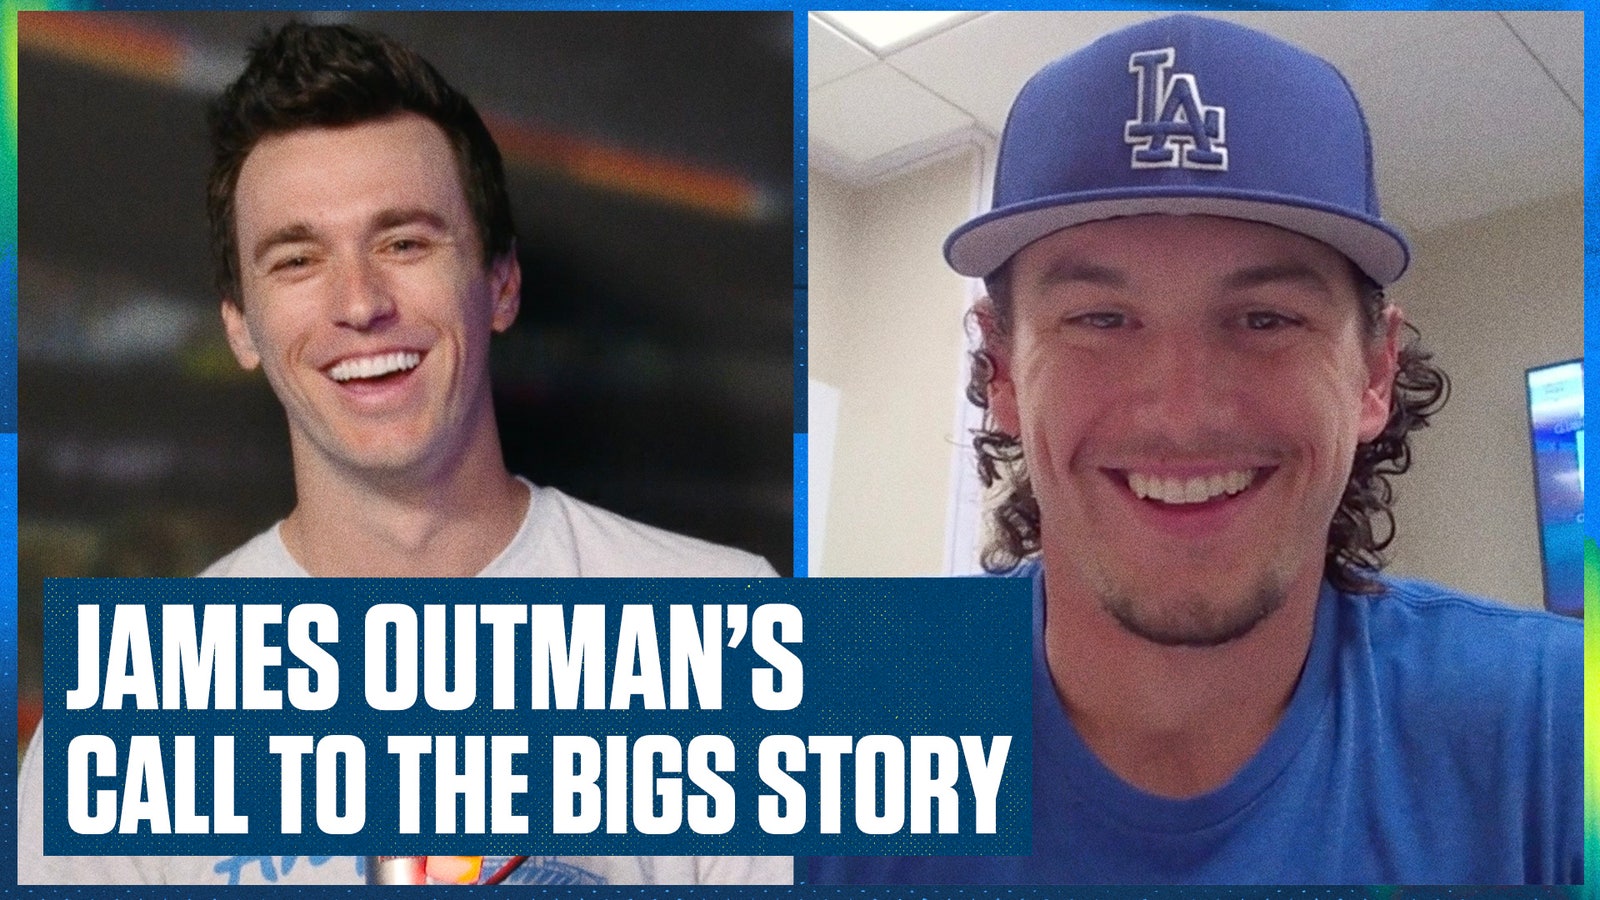 Dodgers' James Outman on his memorable call to the big leagues story